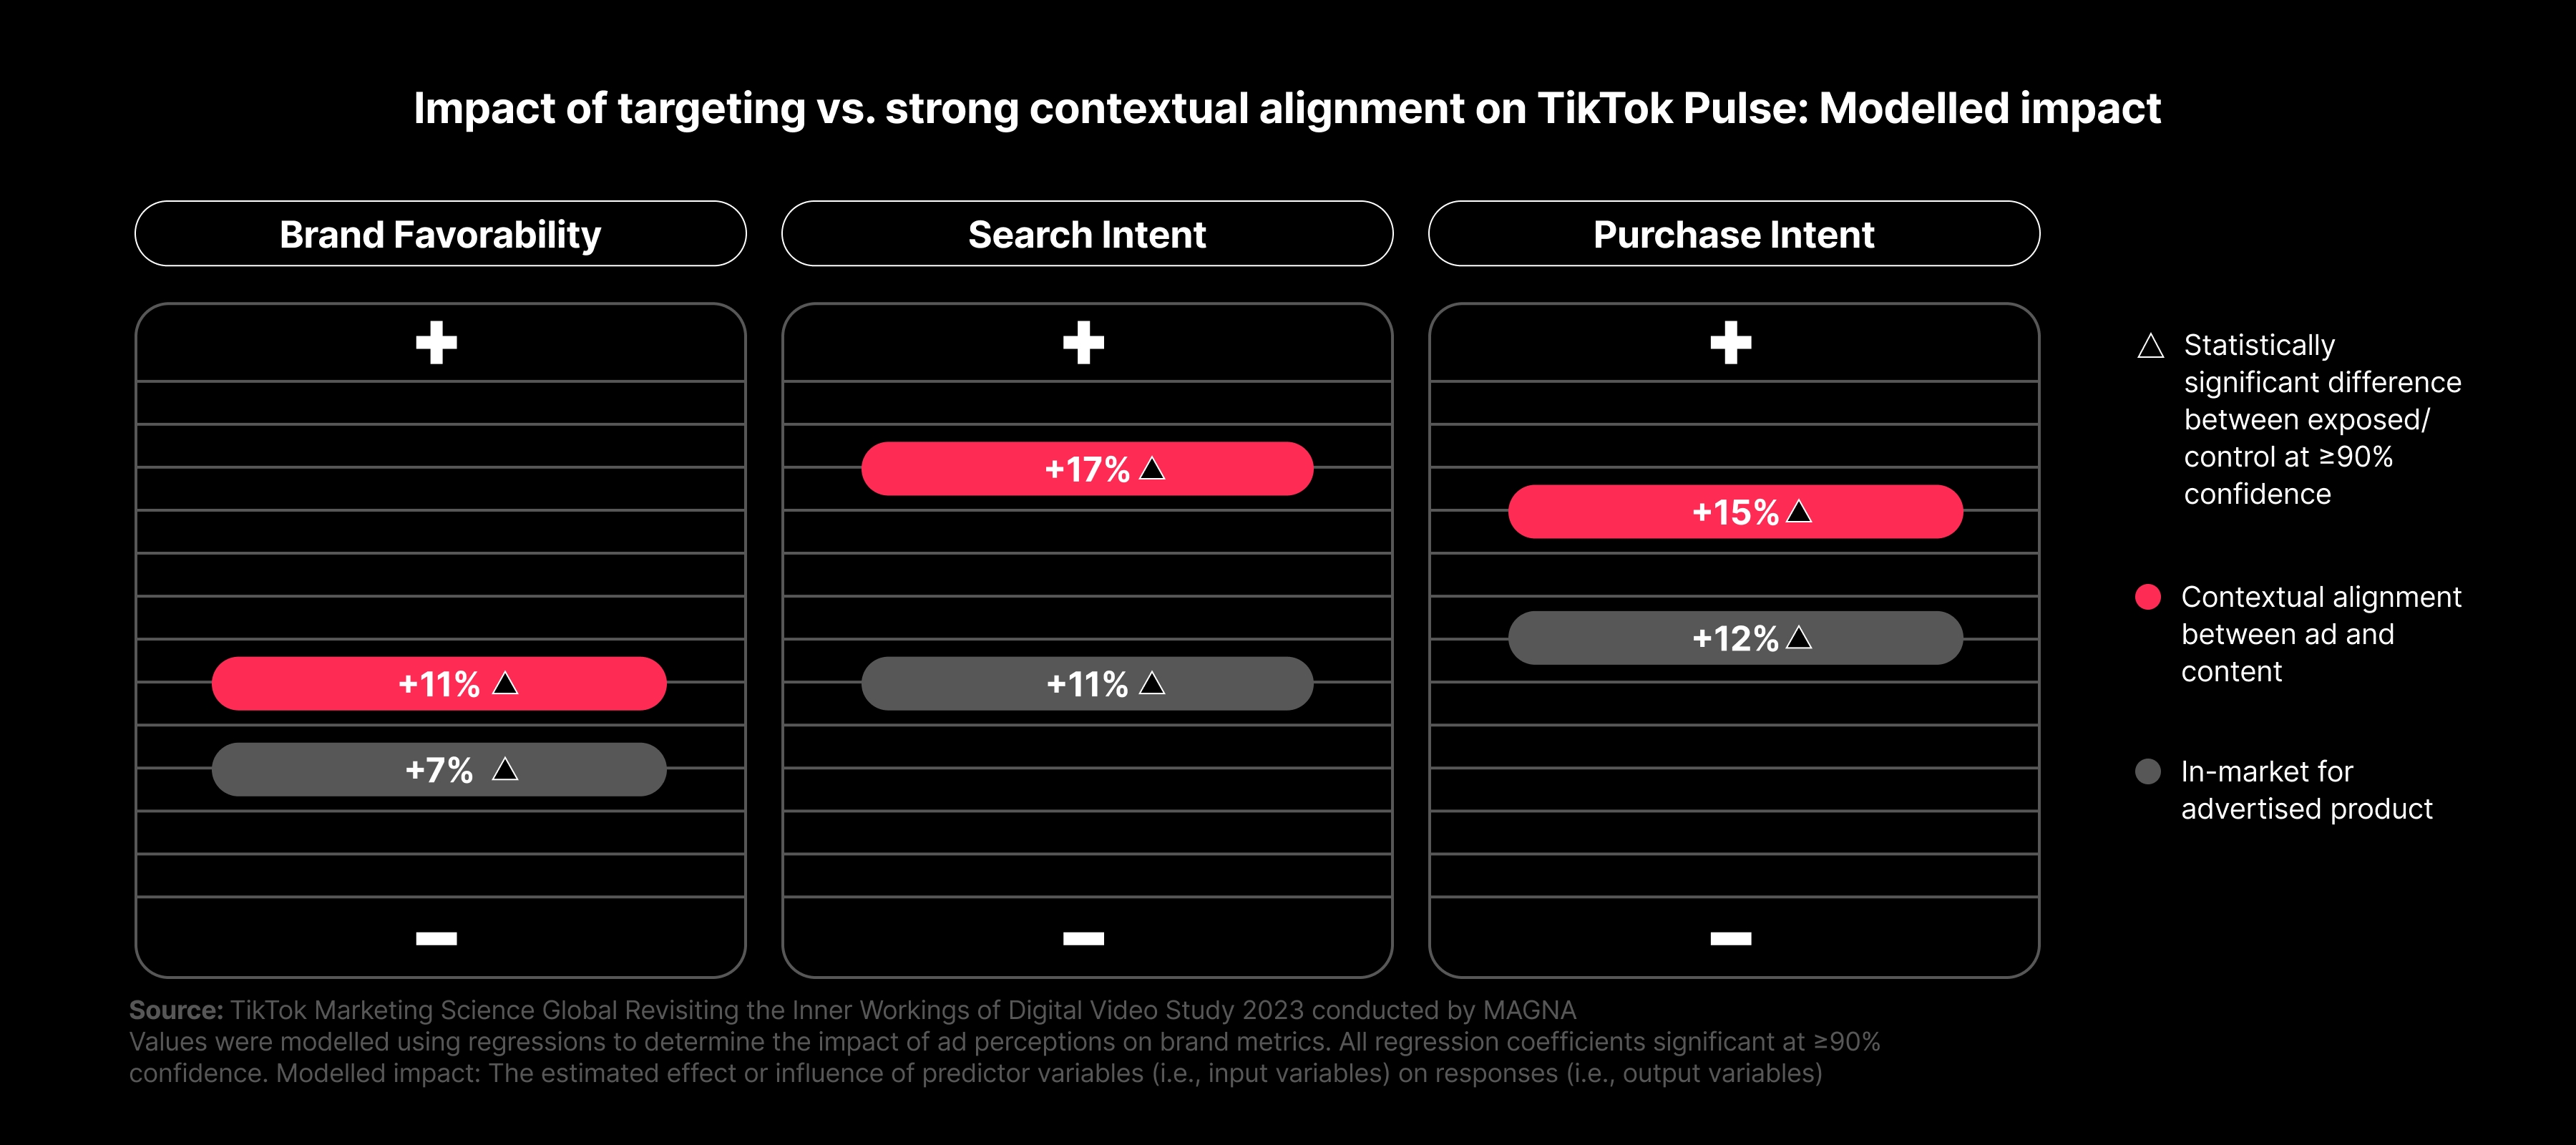 Impact of targeting vs. strong contextual alignment on TikTok Pulse.